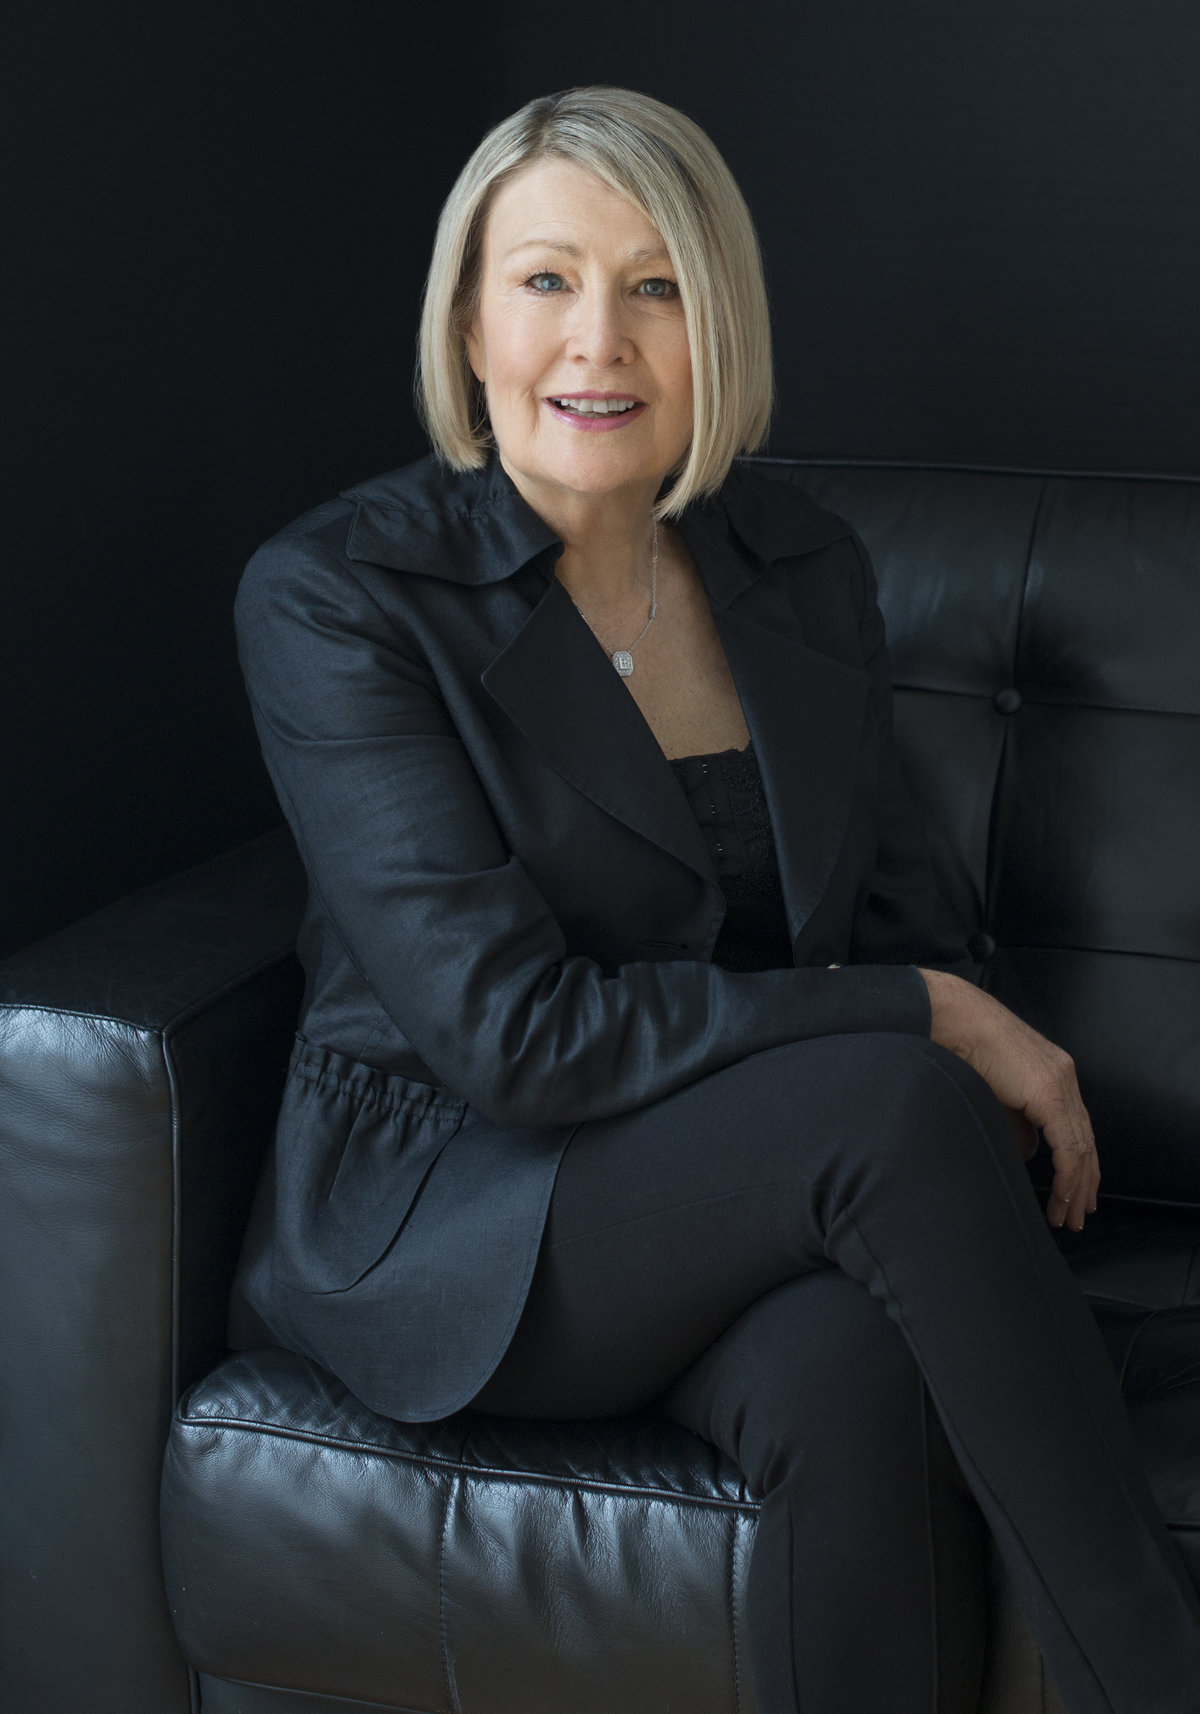 woman Ceo  headshot  photography by puja misra  specialist in womens  photography sitting on black couch wearing black formal  jacket